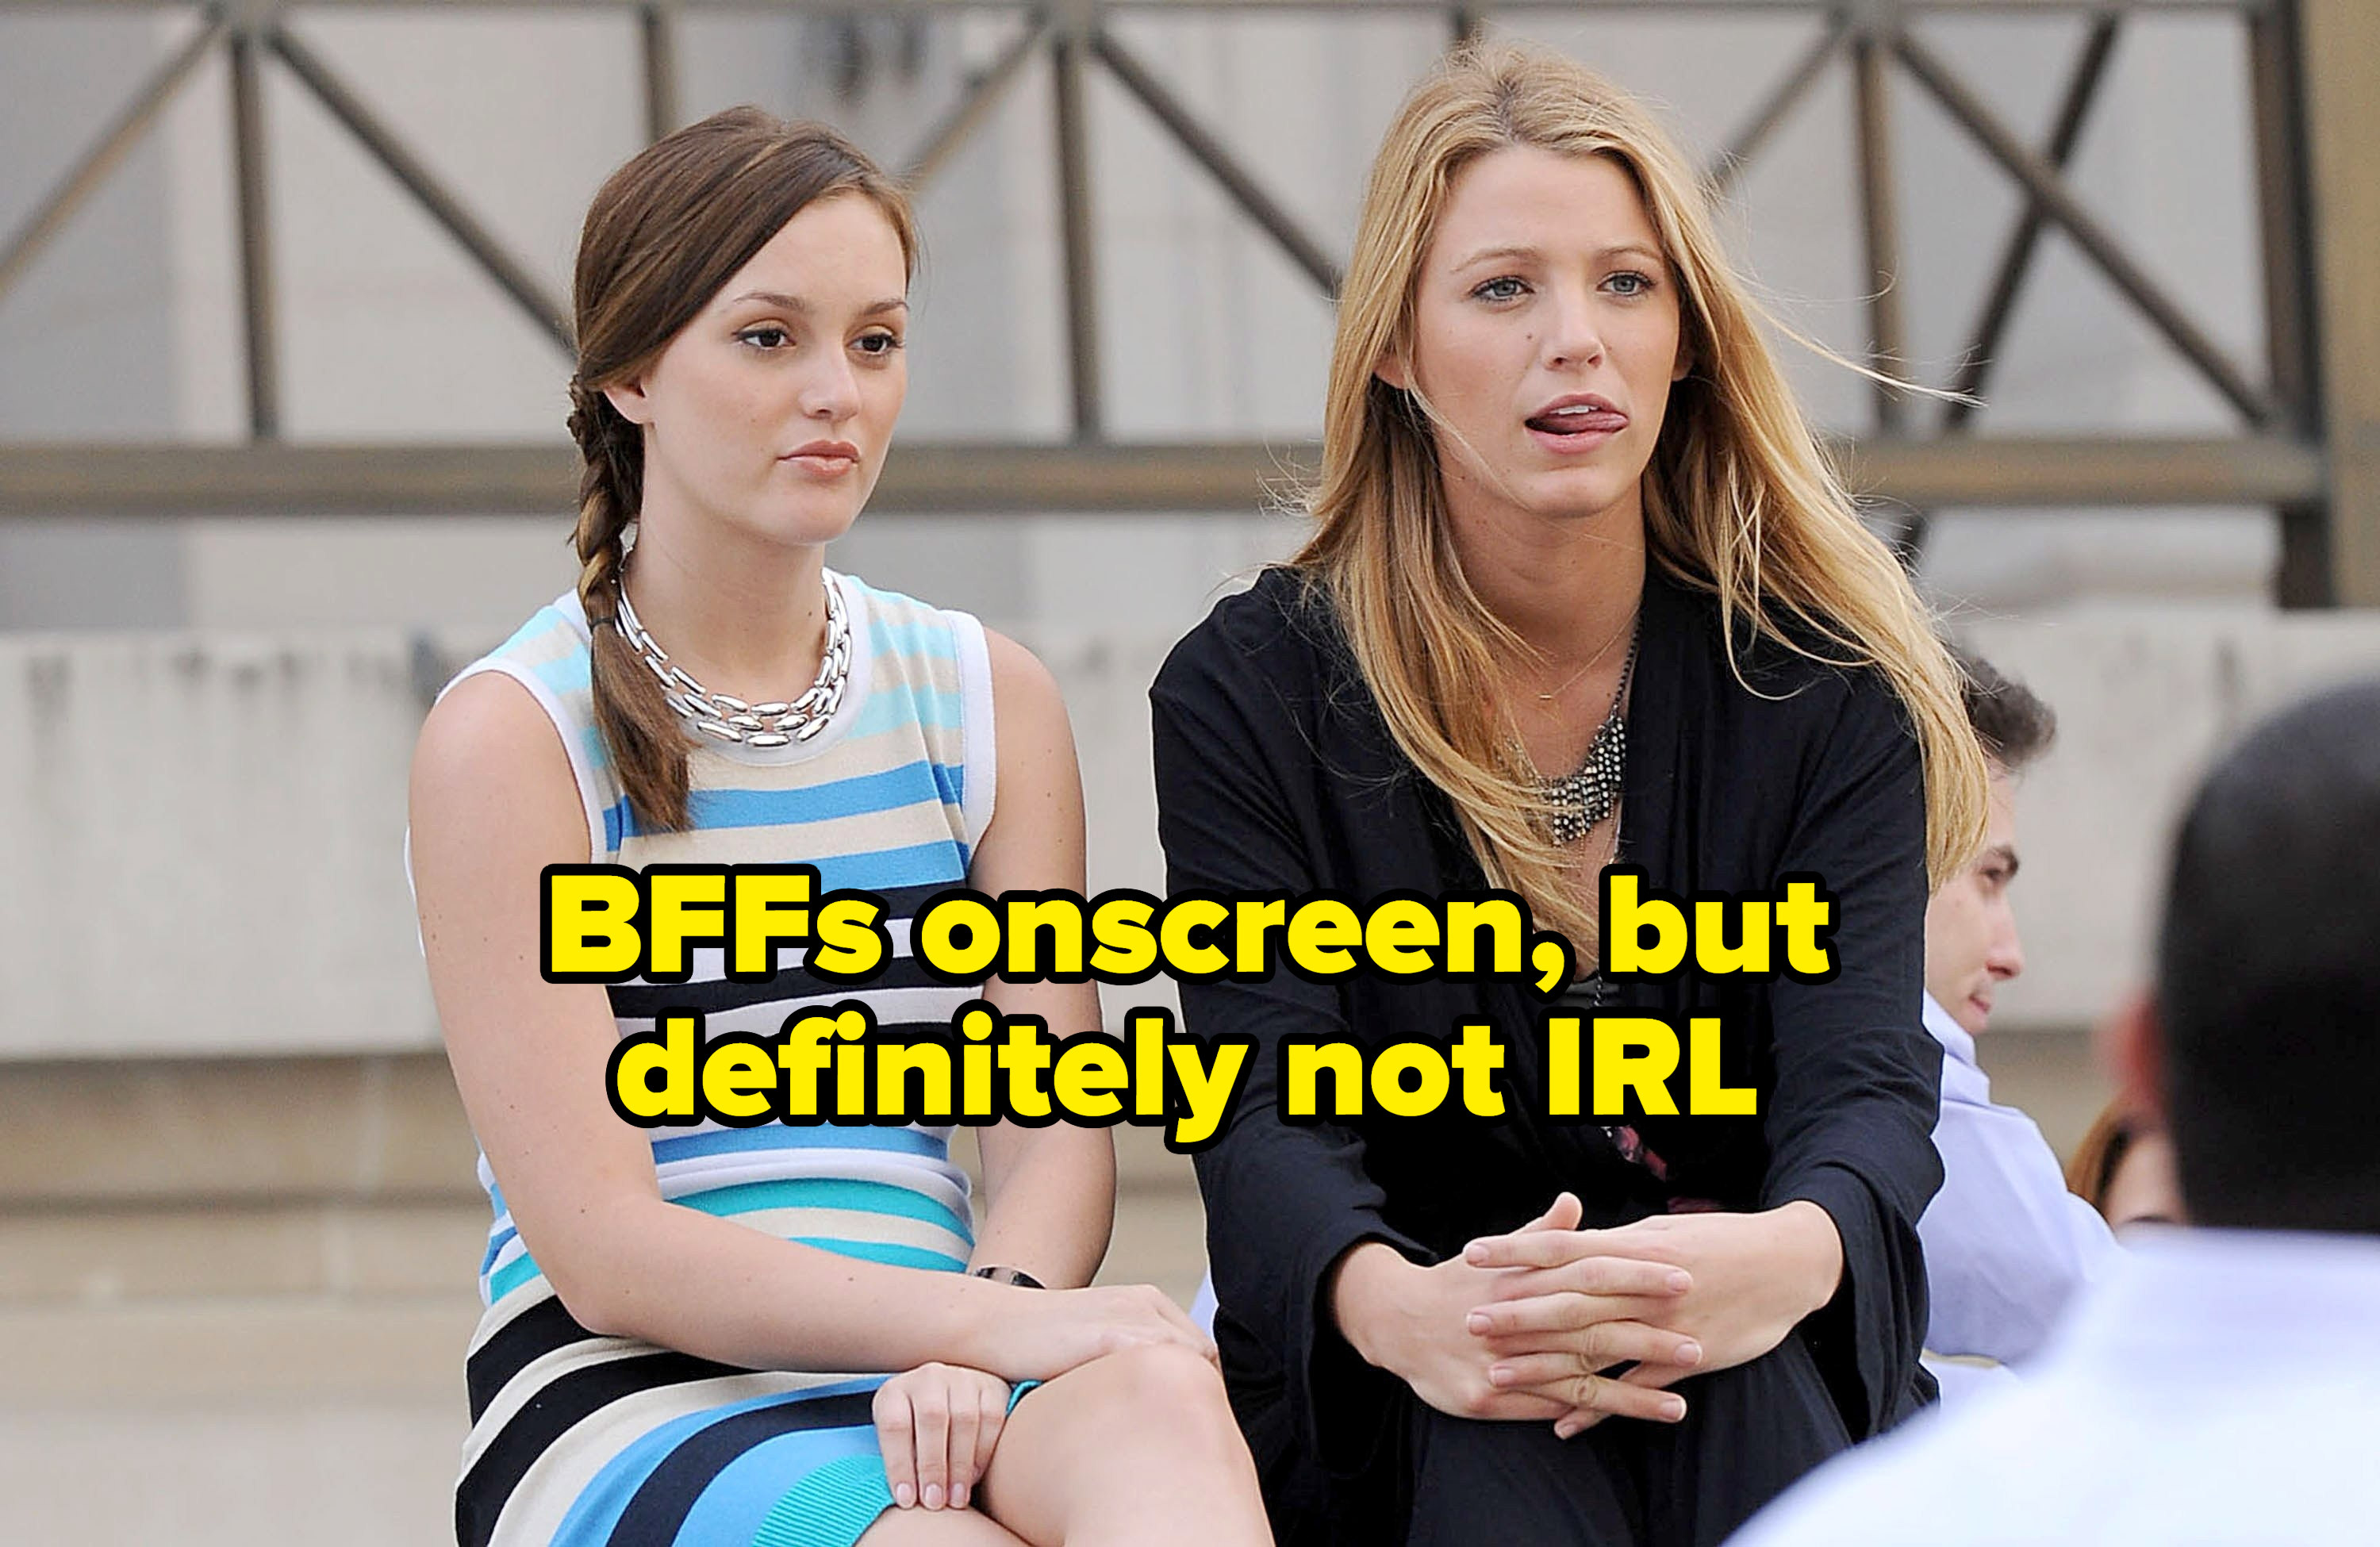 leighton meester and blake lively in gossip girl labeled "BFFs onscreen, but definitely not IRL"